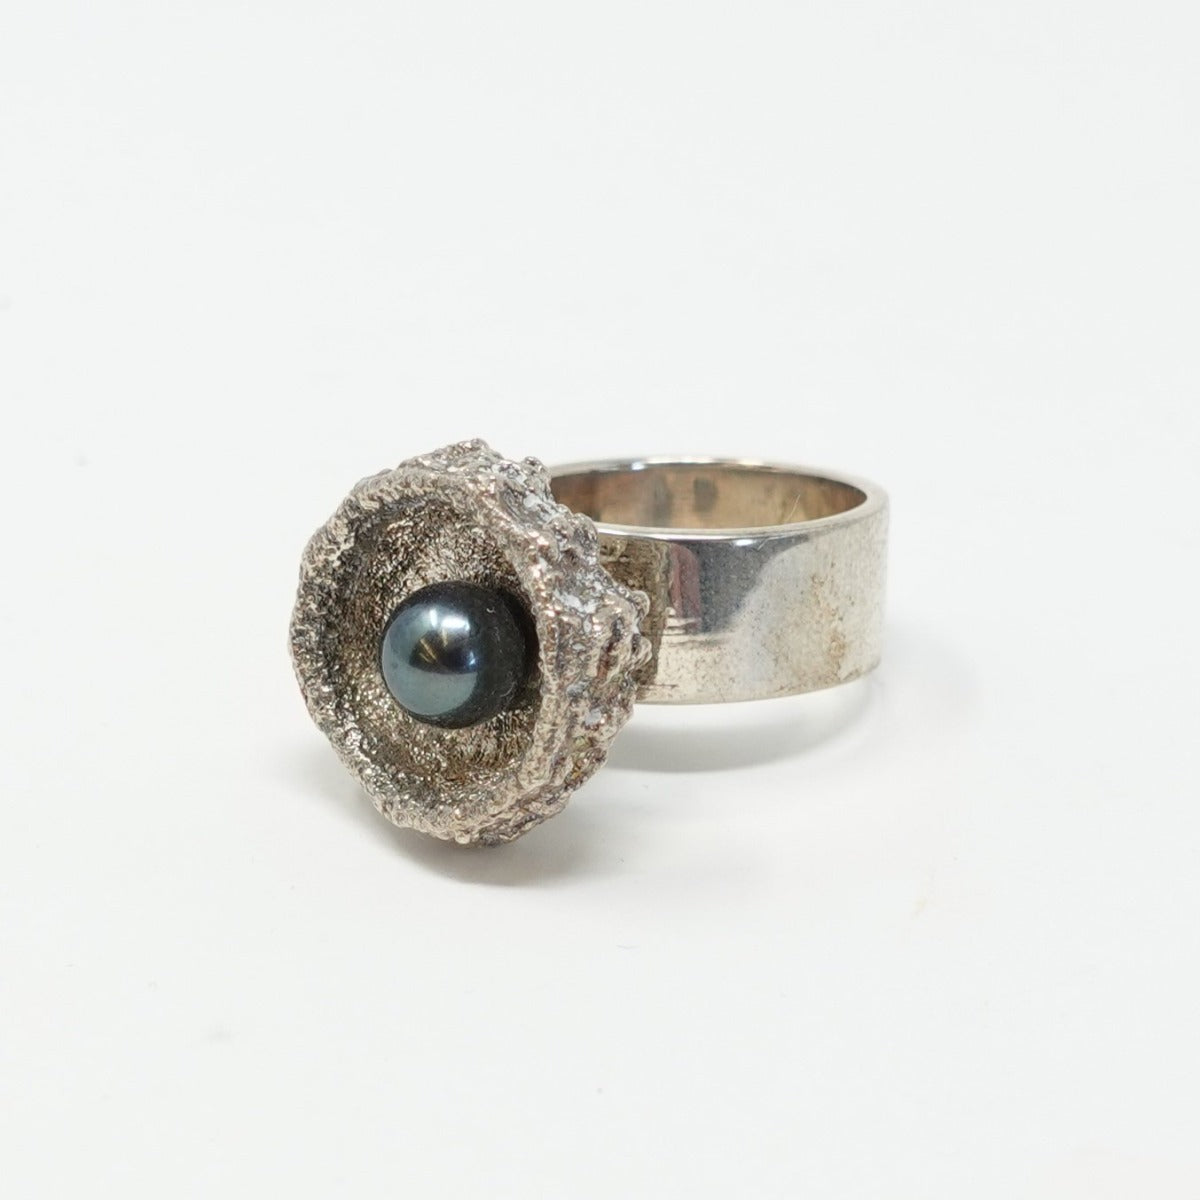 Jonathan Rout - Silver band ring - with silver basket holding iridescent orb